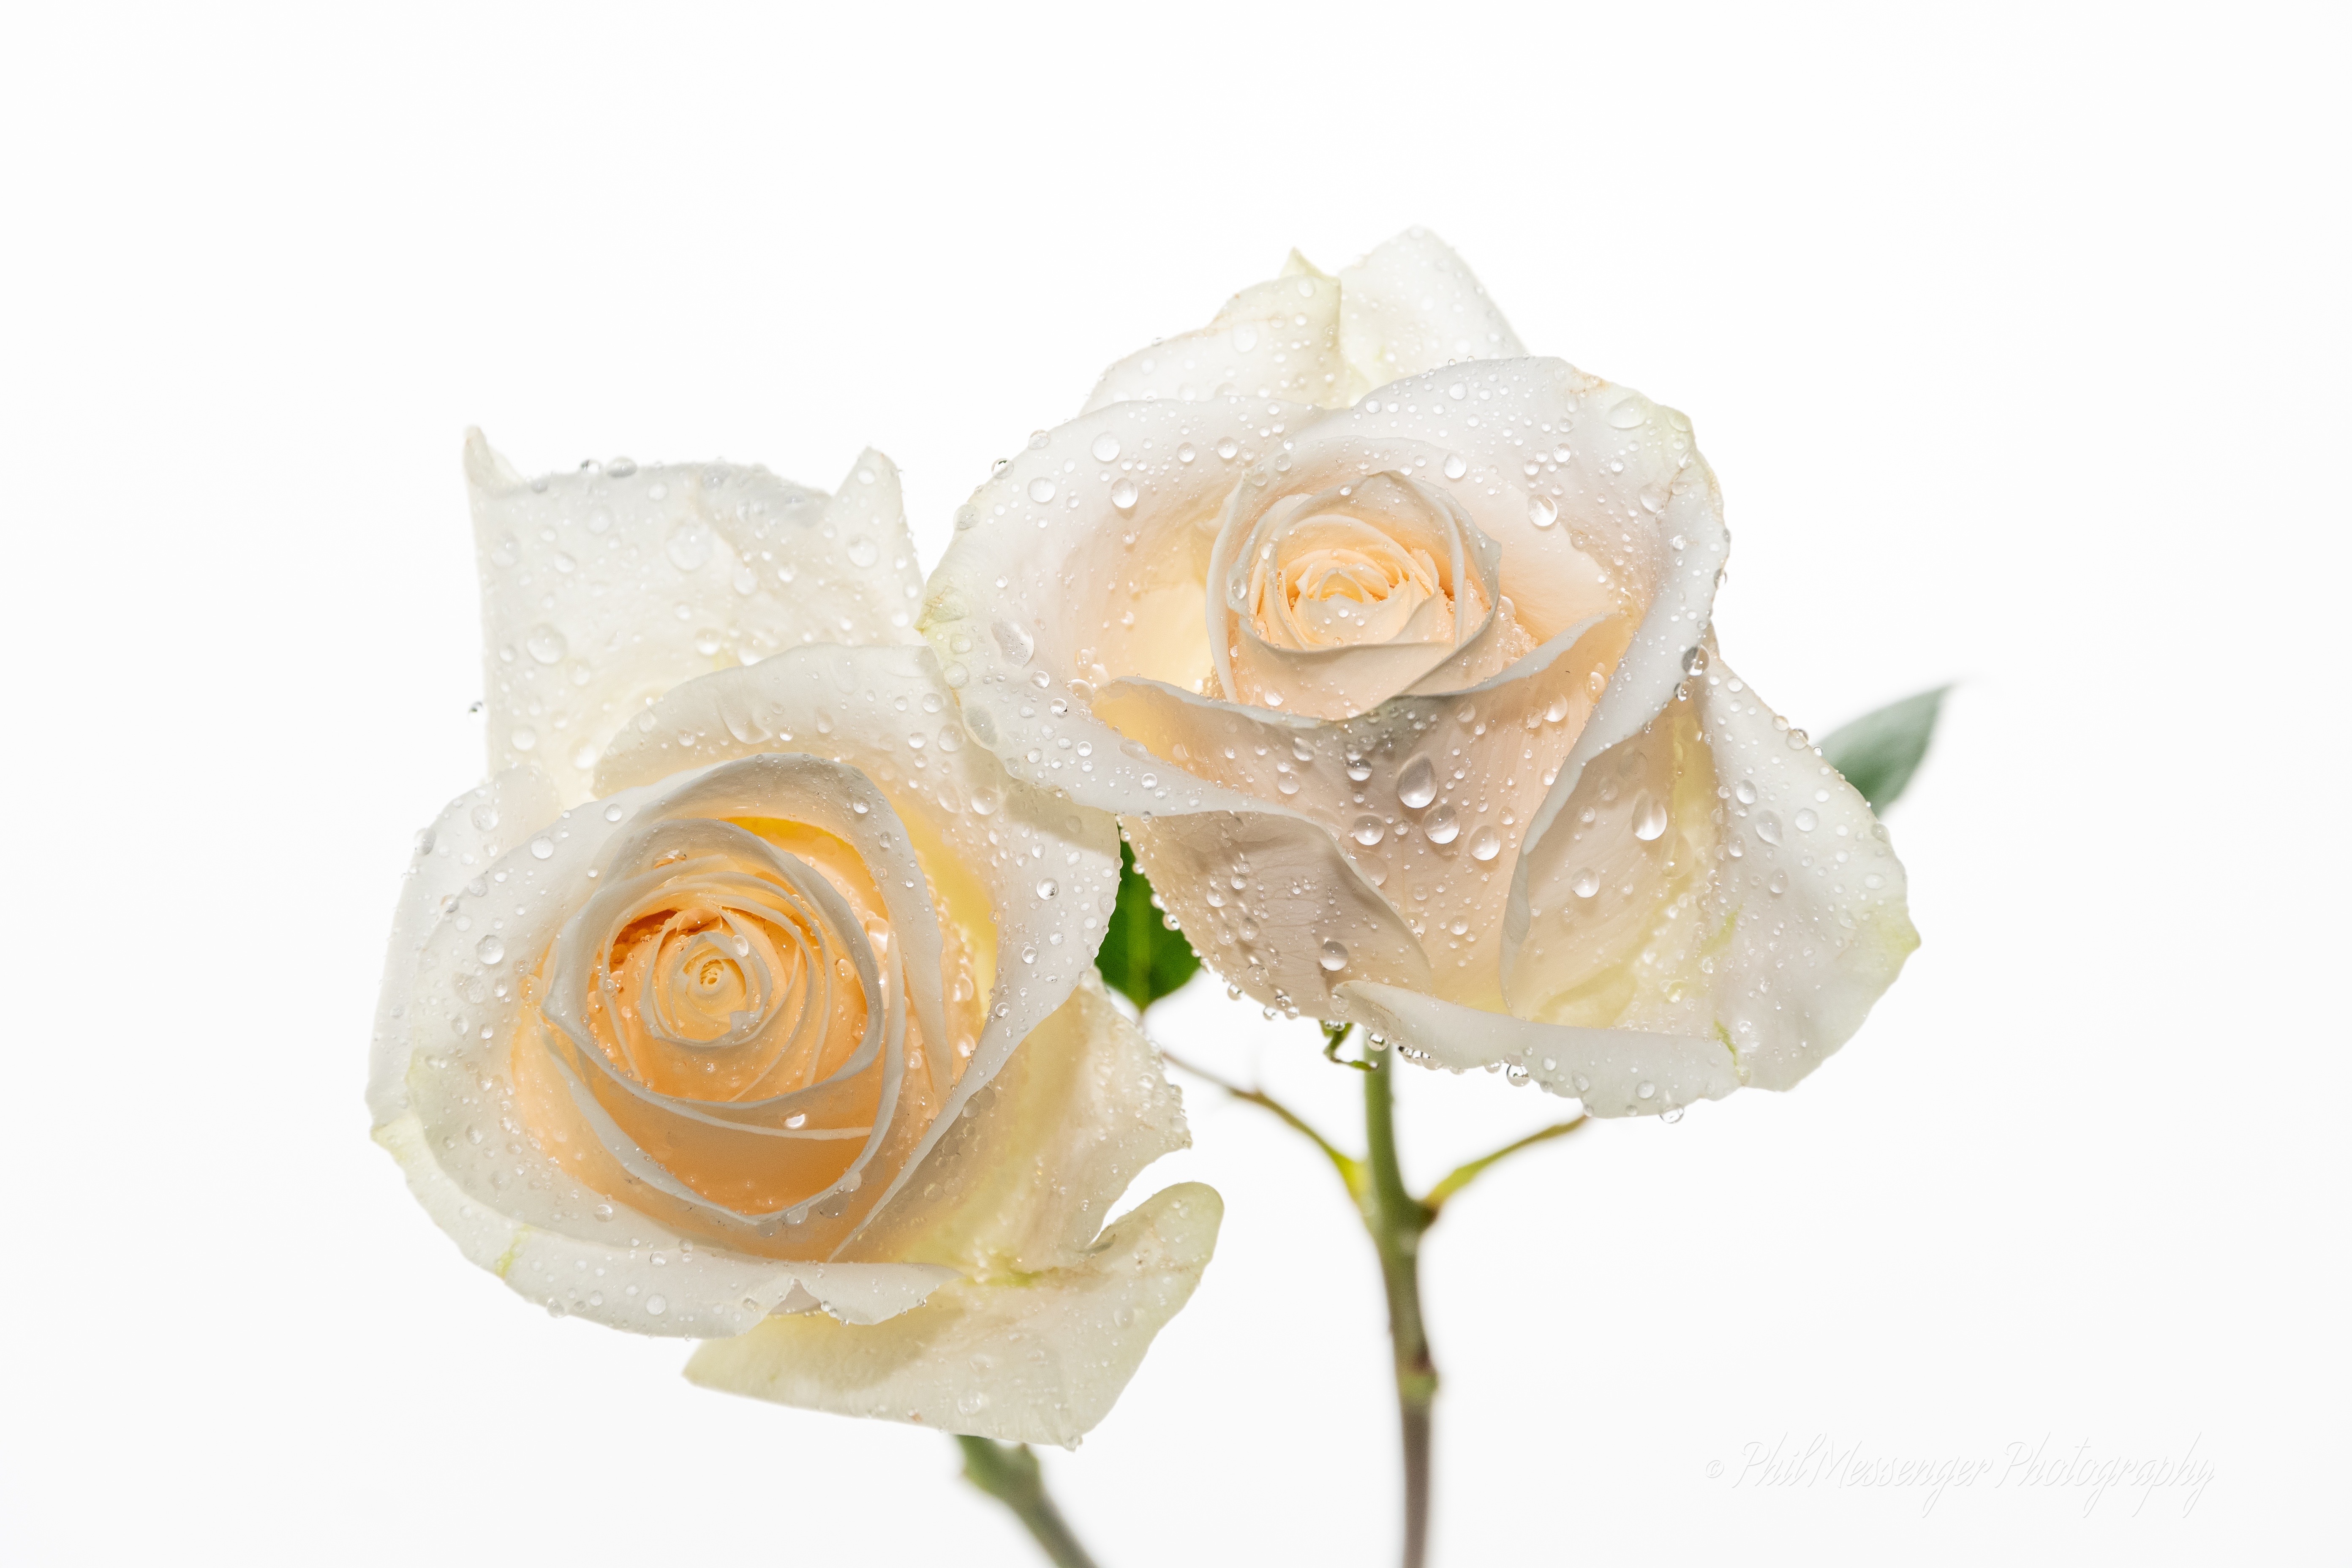 Water droplets on Roses.